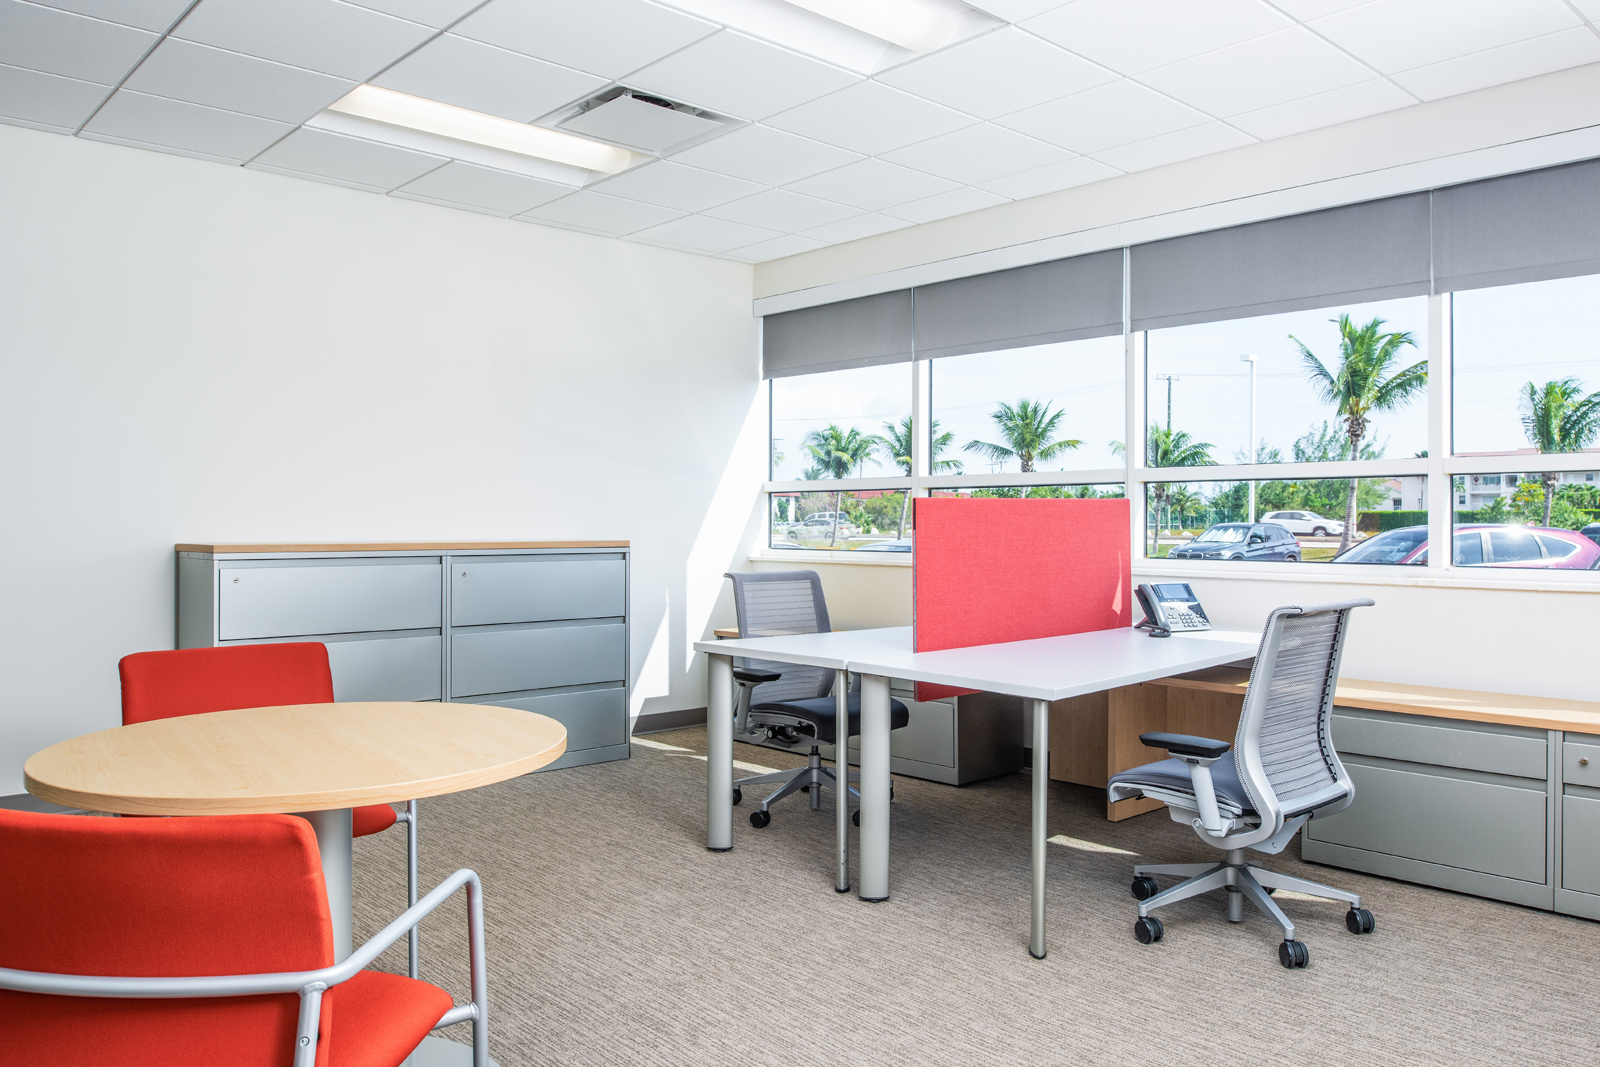 readyspaces: Furnished Coworking Office Space in Grand Cayman – Readyspaces  are professional working environments designed to be flexible and fit the  ever-evolving needs of doing business–locally and globally.